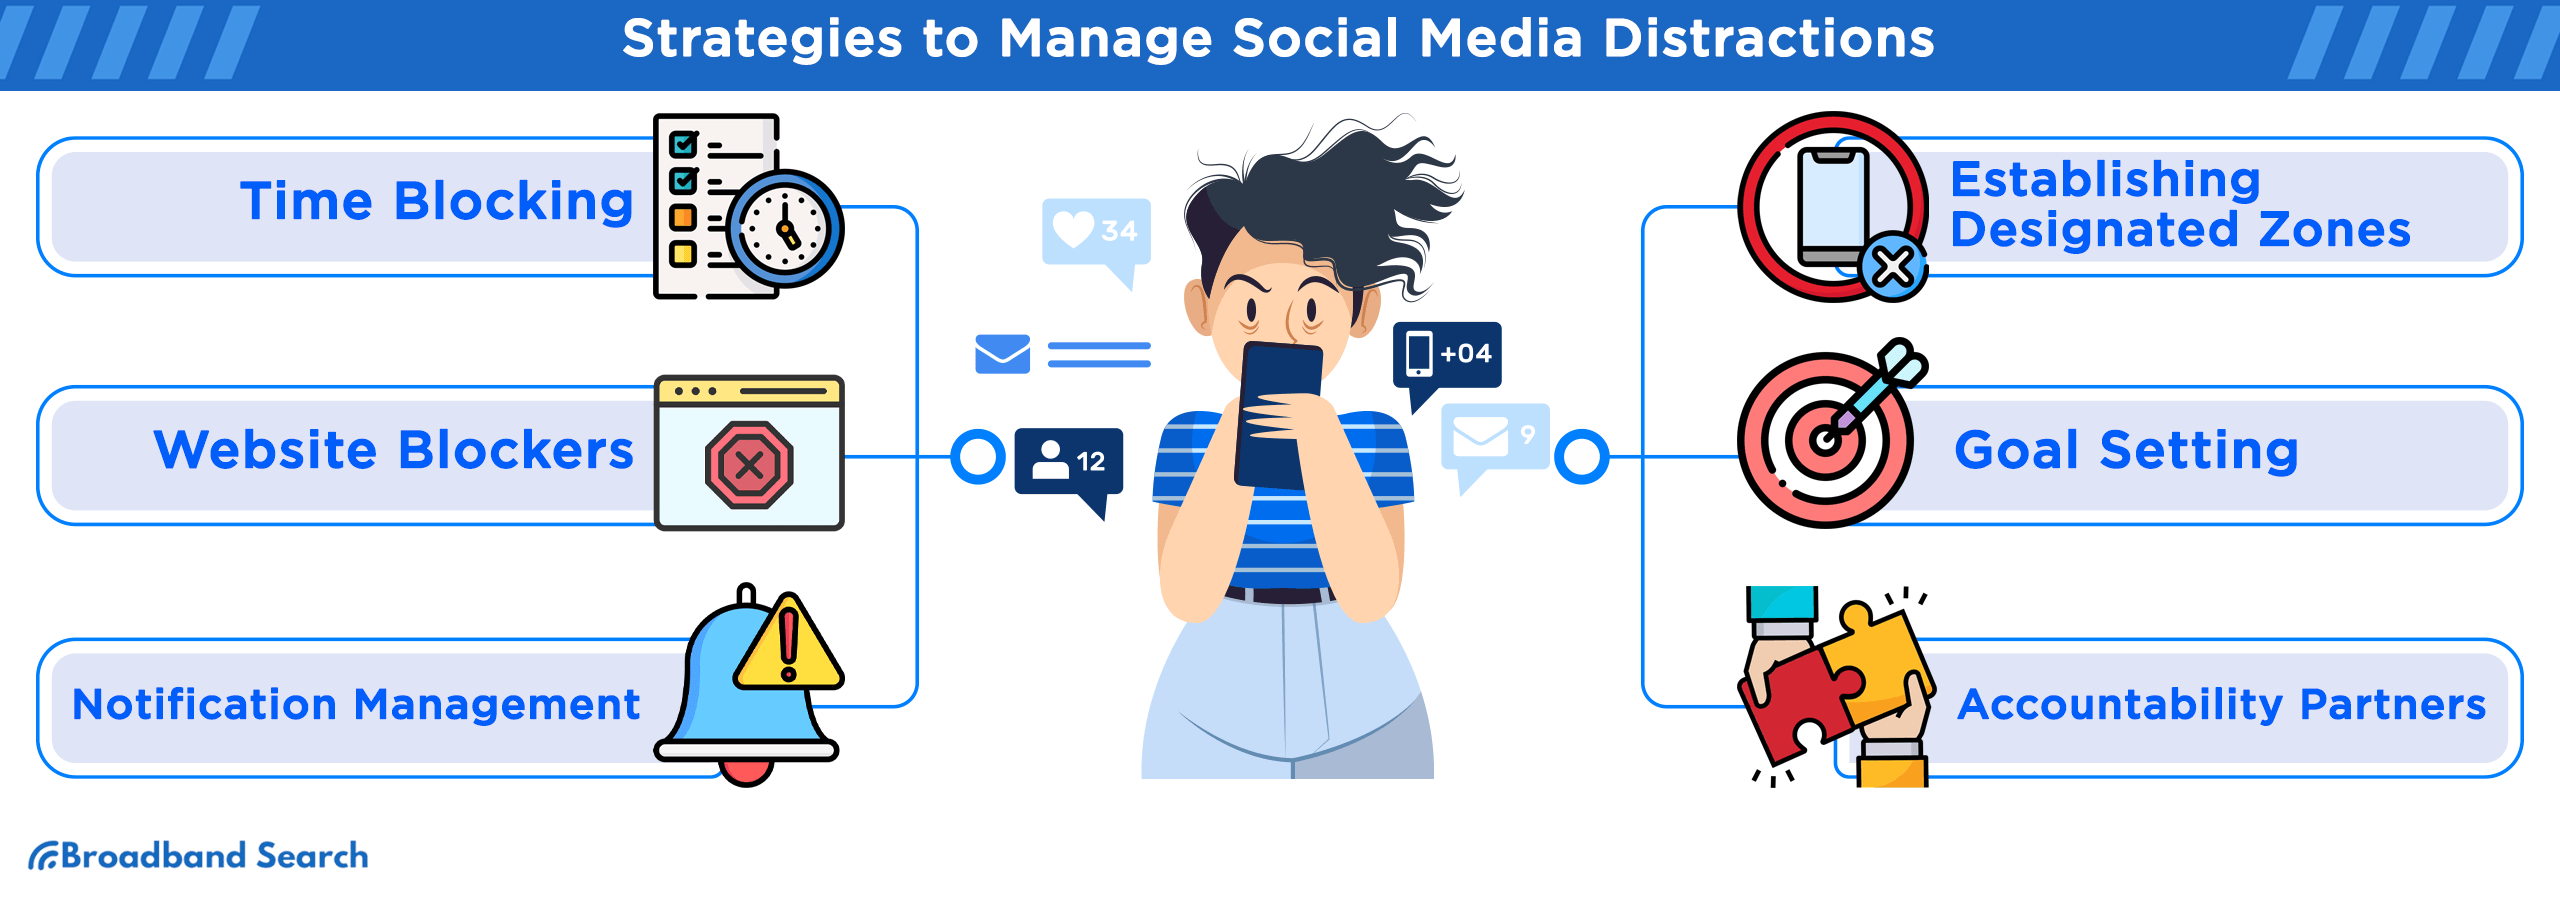 six strategies to manage social media distractions